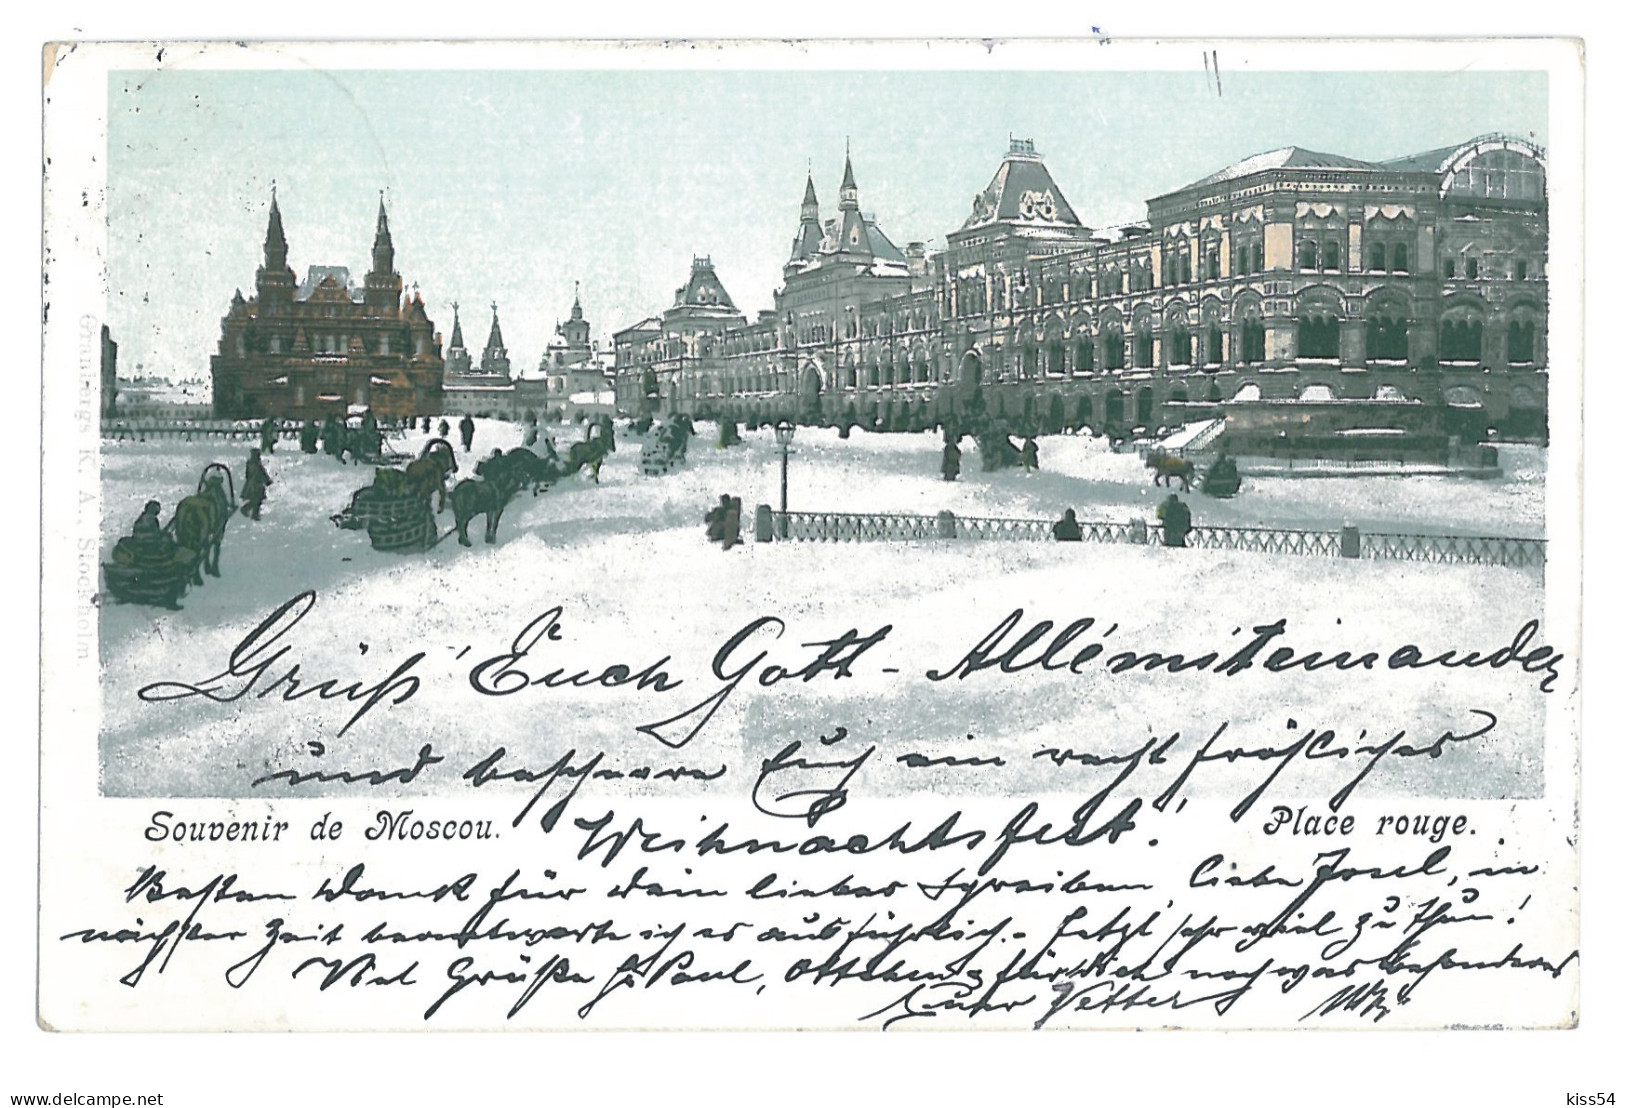 RUS 60 - 13862 MOSCOW, Russia, Litho, Red Market - Old Postcard - Used - 1900 - Rusia